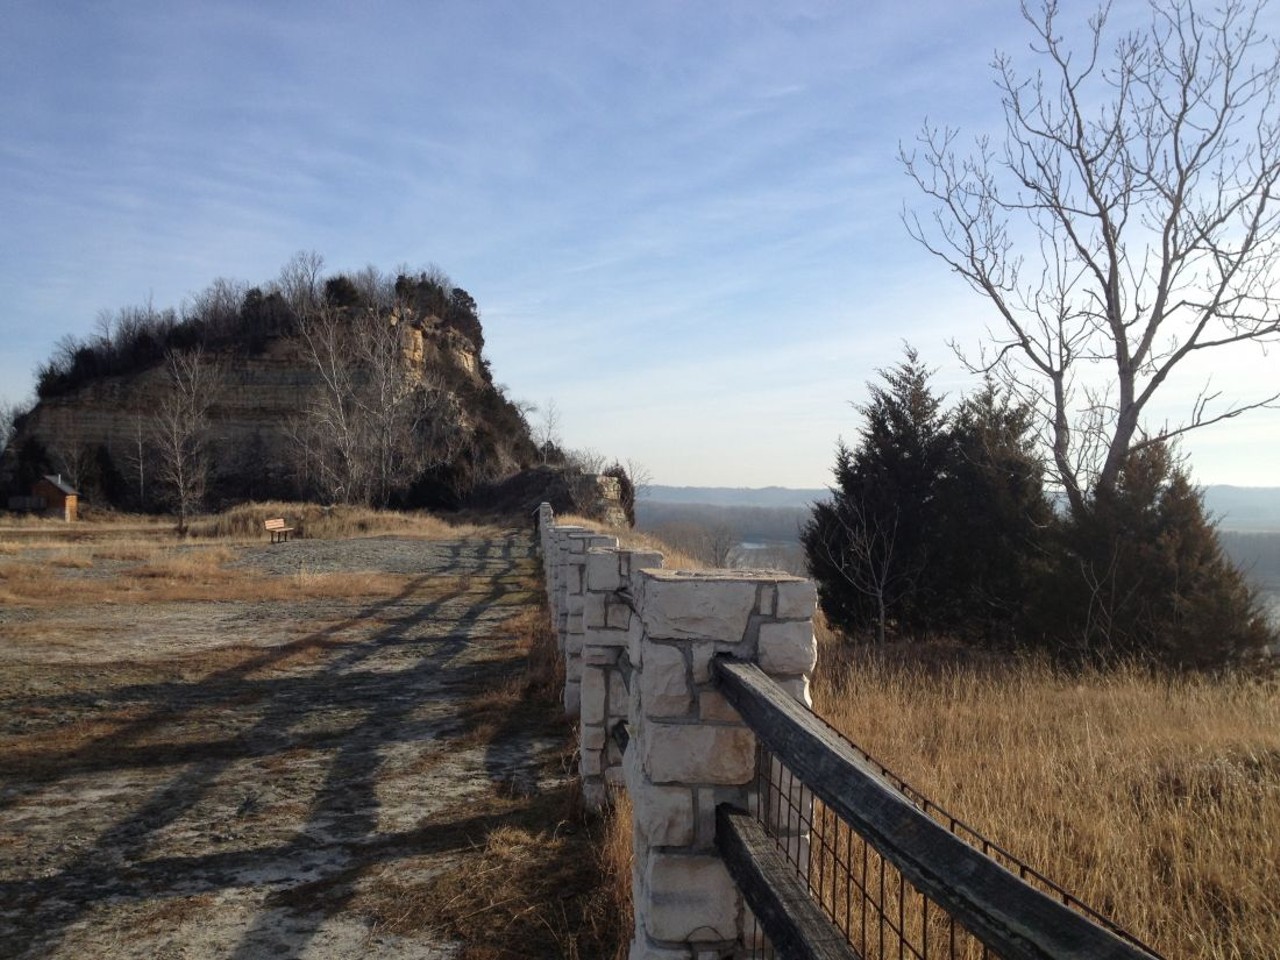 Thanks to its proximity to the Missouri River, Klondike Park is also a good spot for possible eagle sightings. Get your camera ready. Photo by Kelly Glueck.